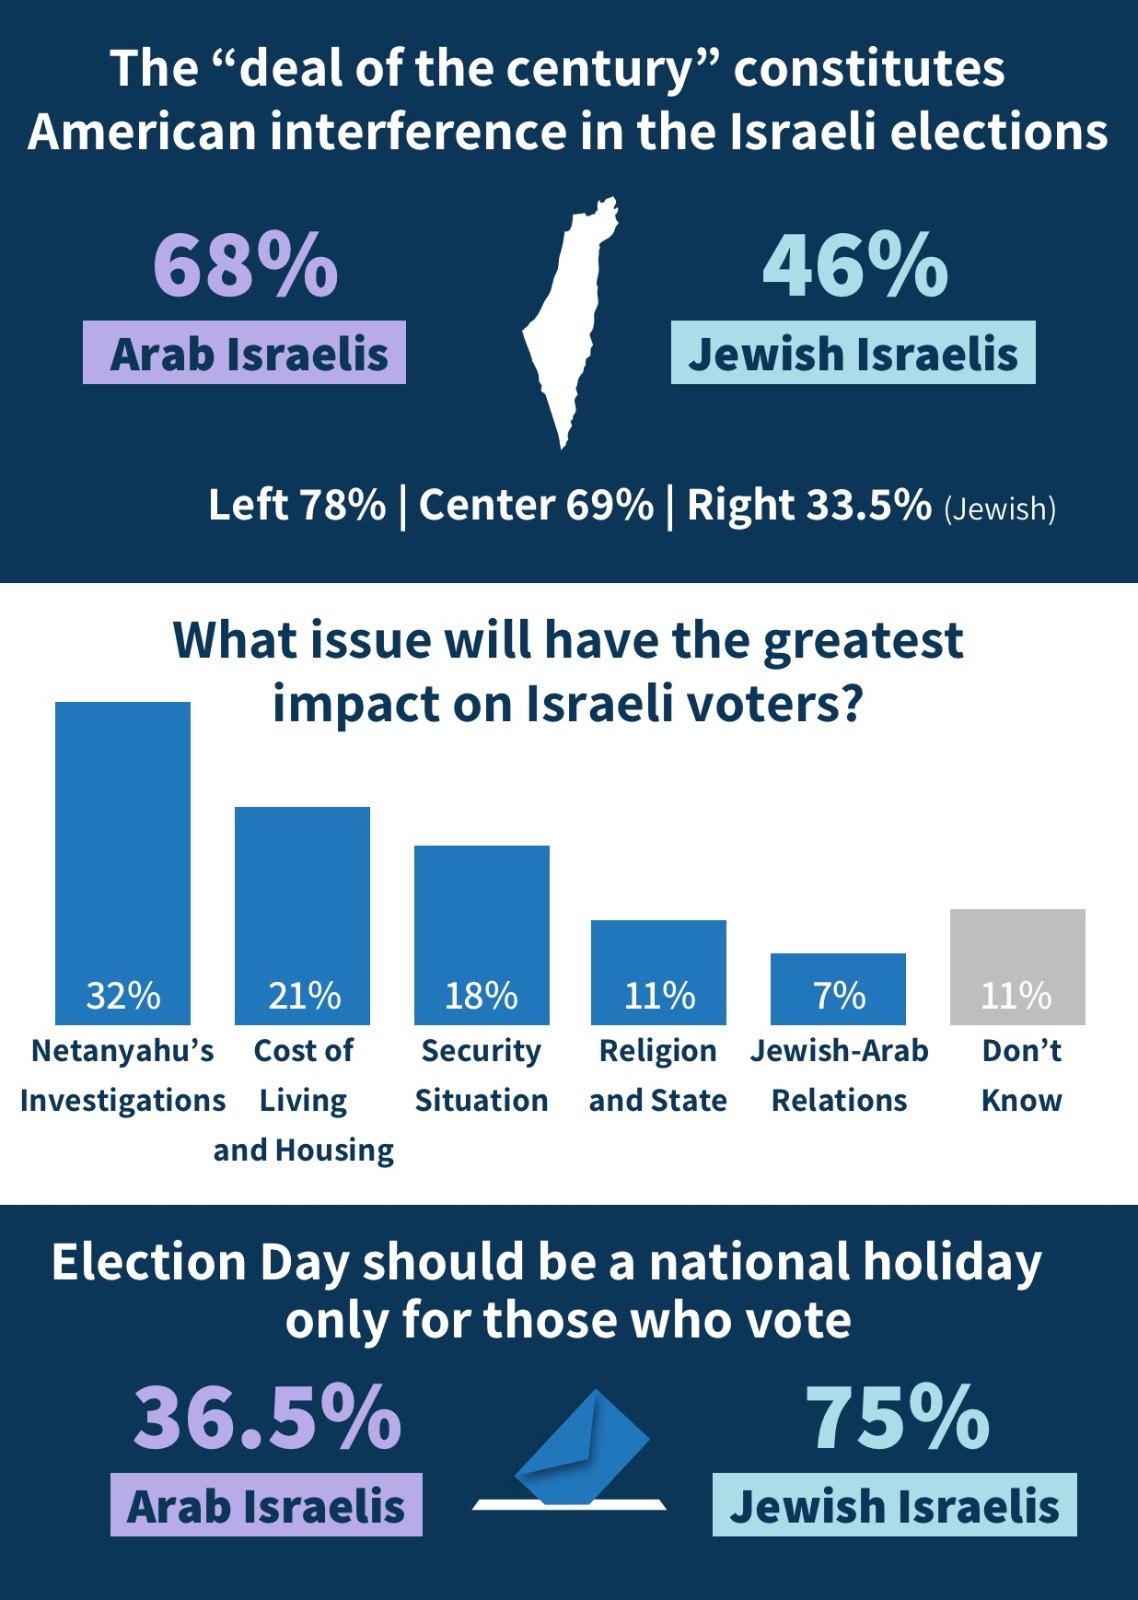 Israelis Believe Netanyahu’s Investigations Will have the Greatest Impact on the Vote